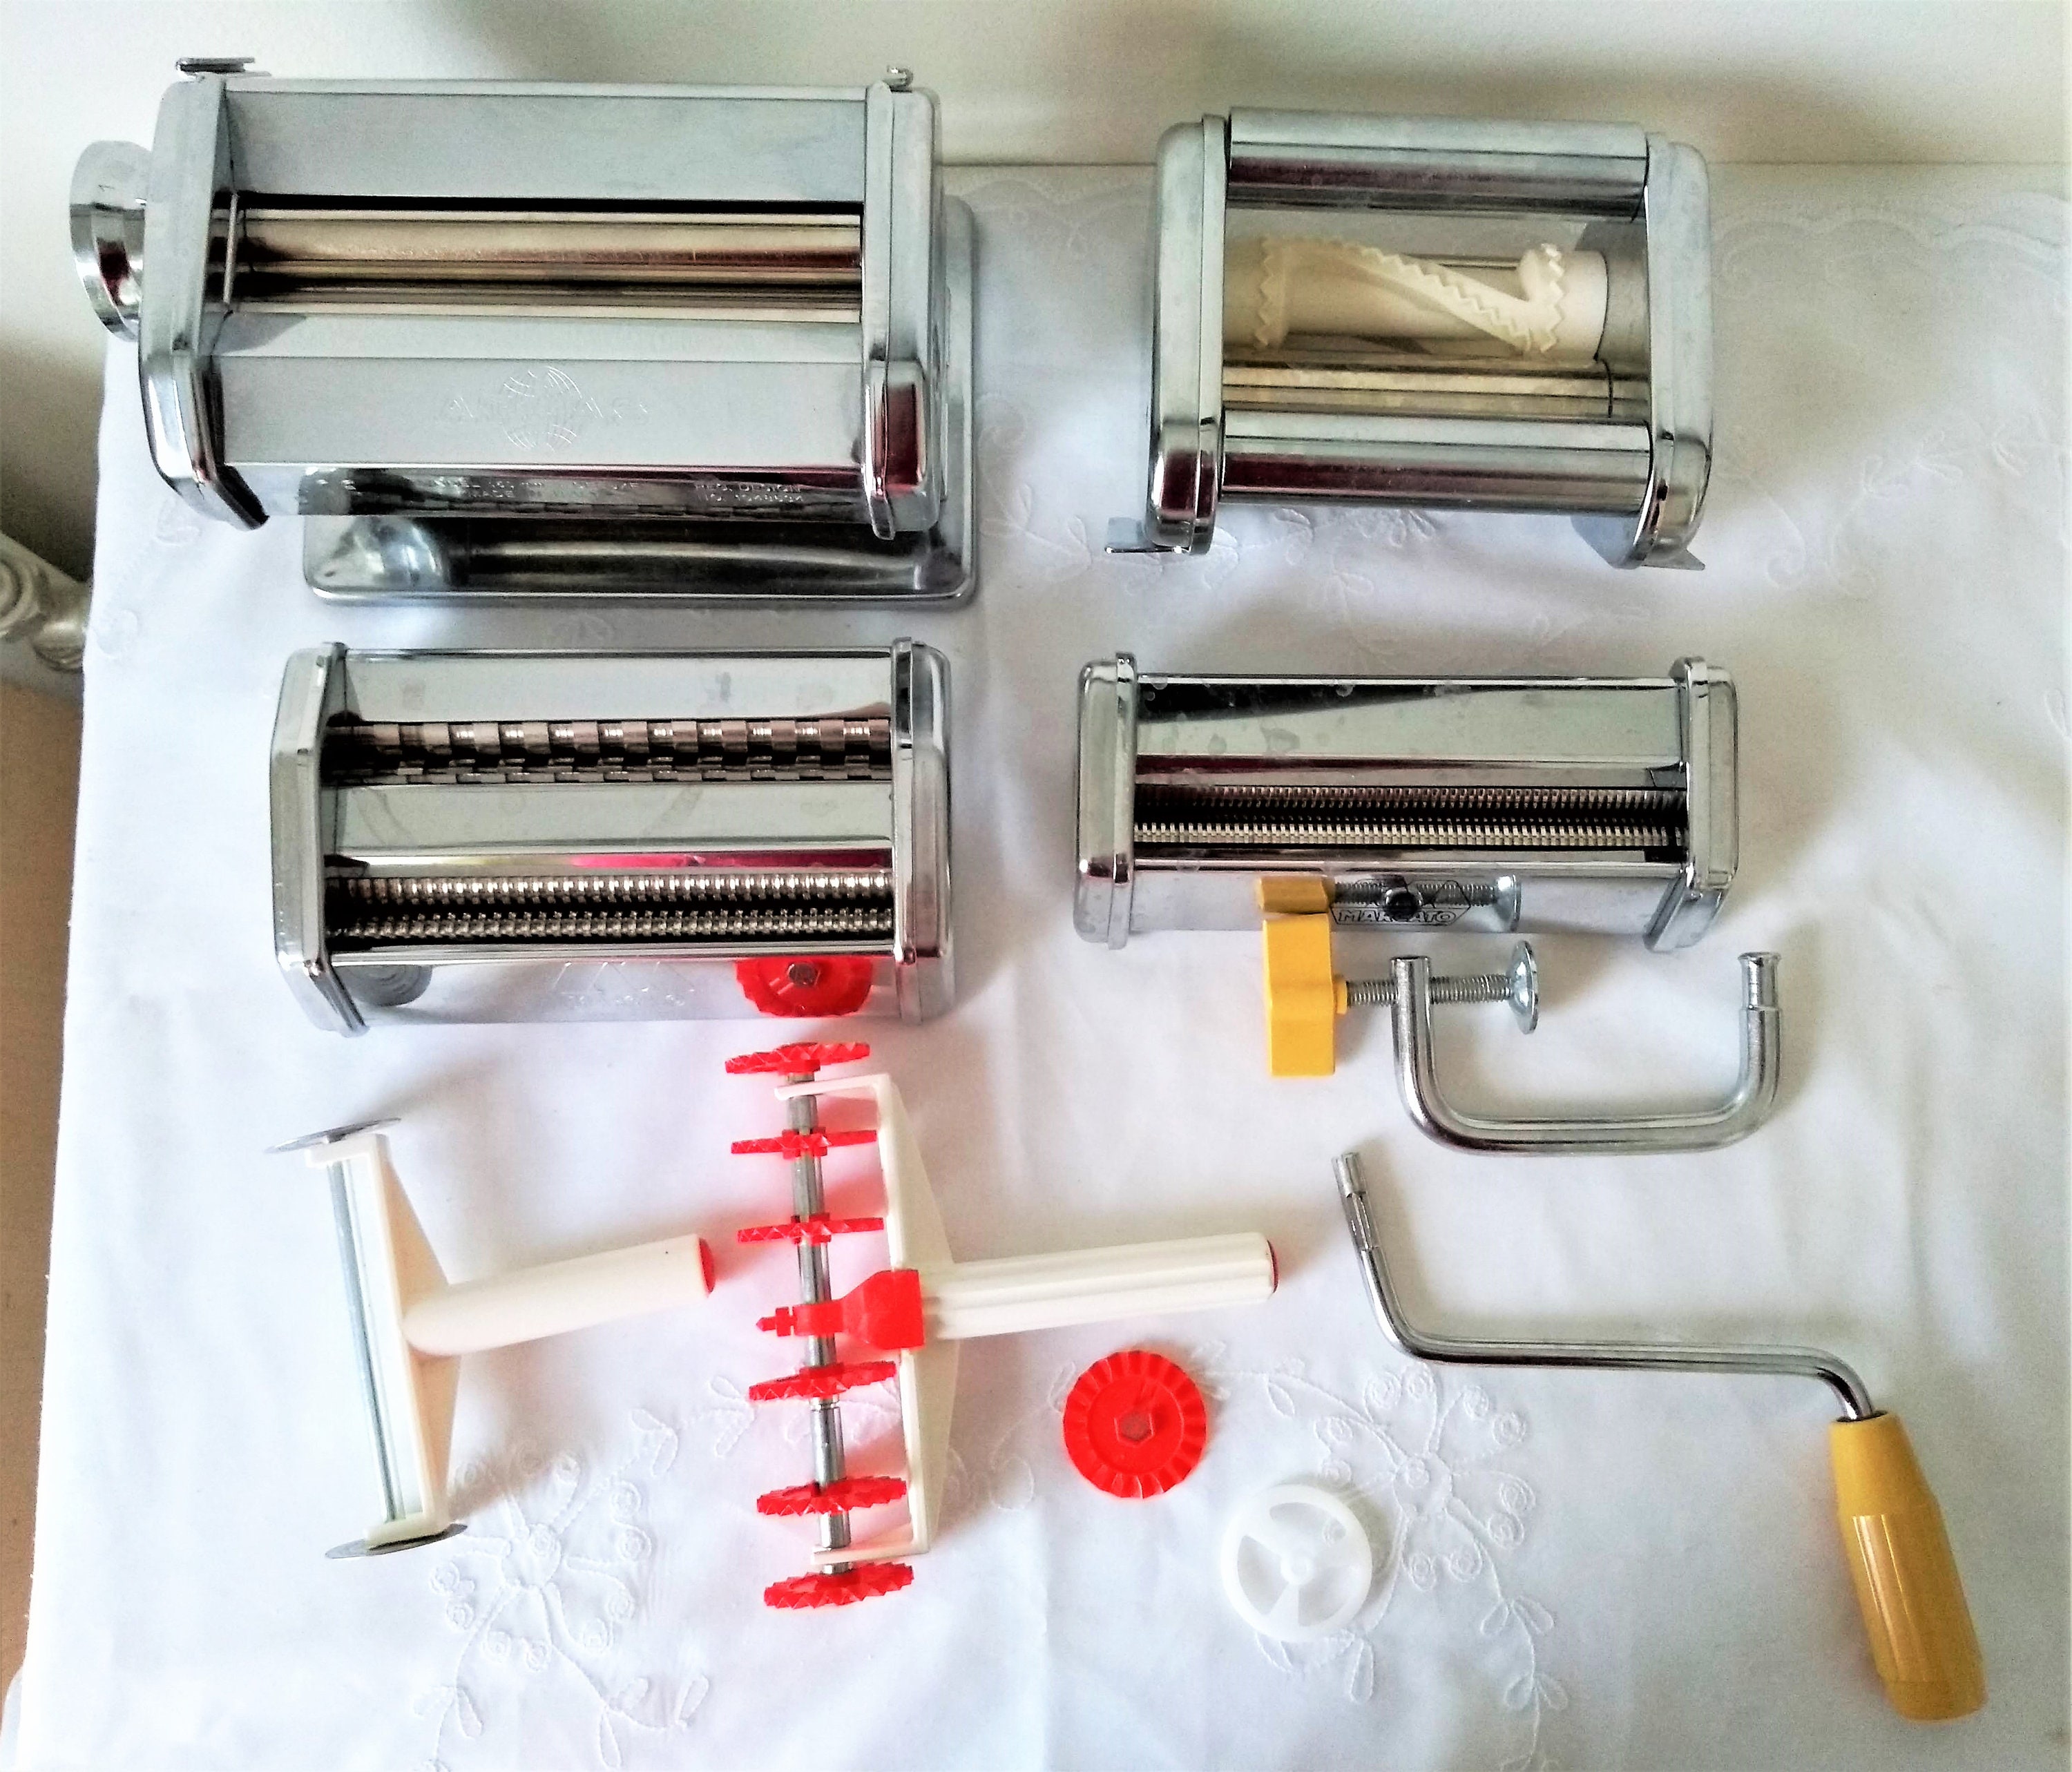 Vintage Stainless Steel Pasta Maker (PA515)